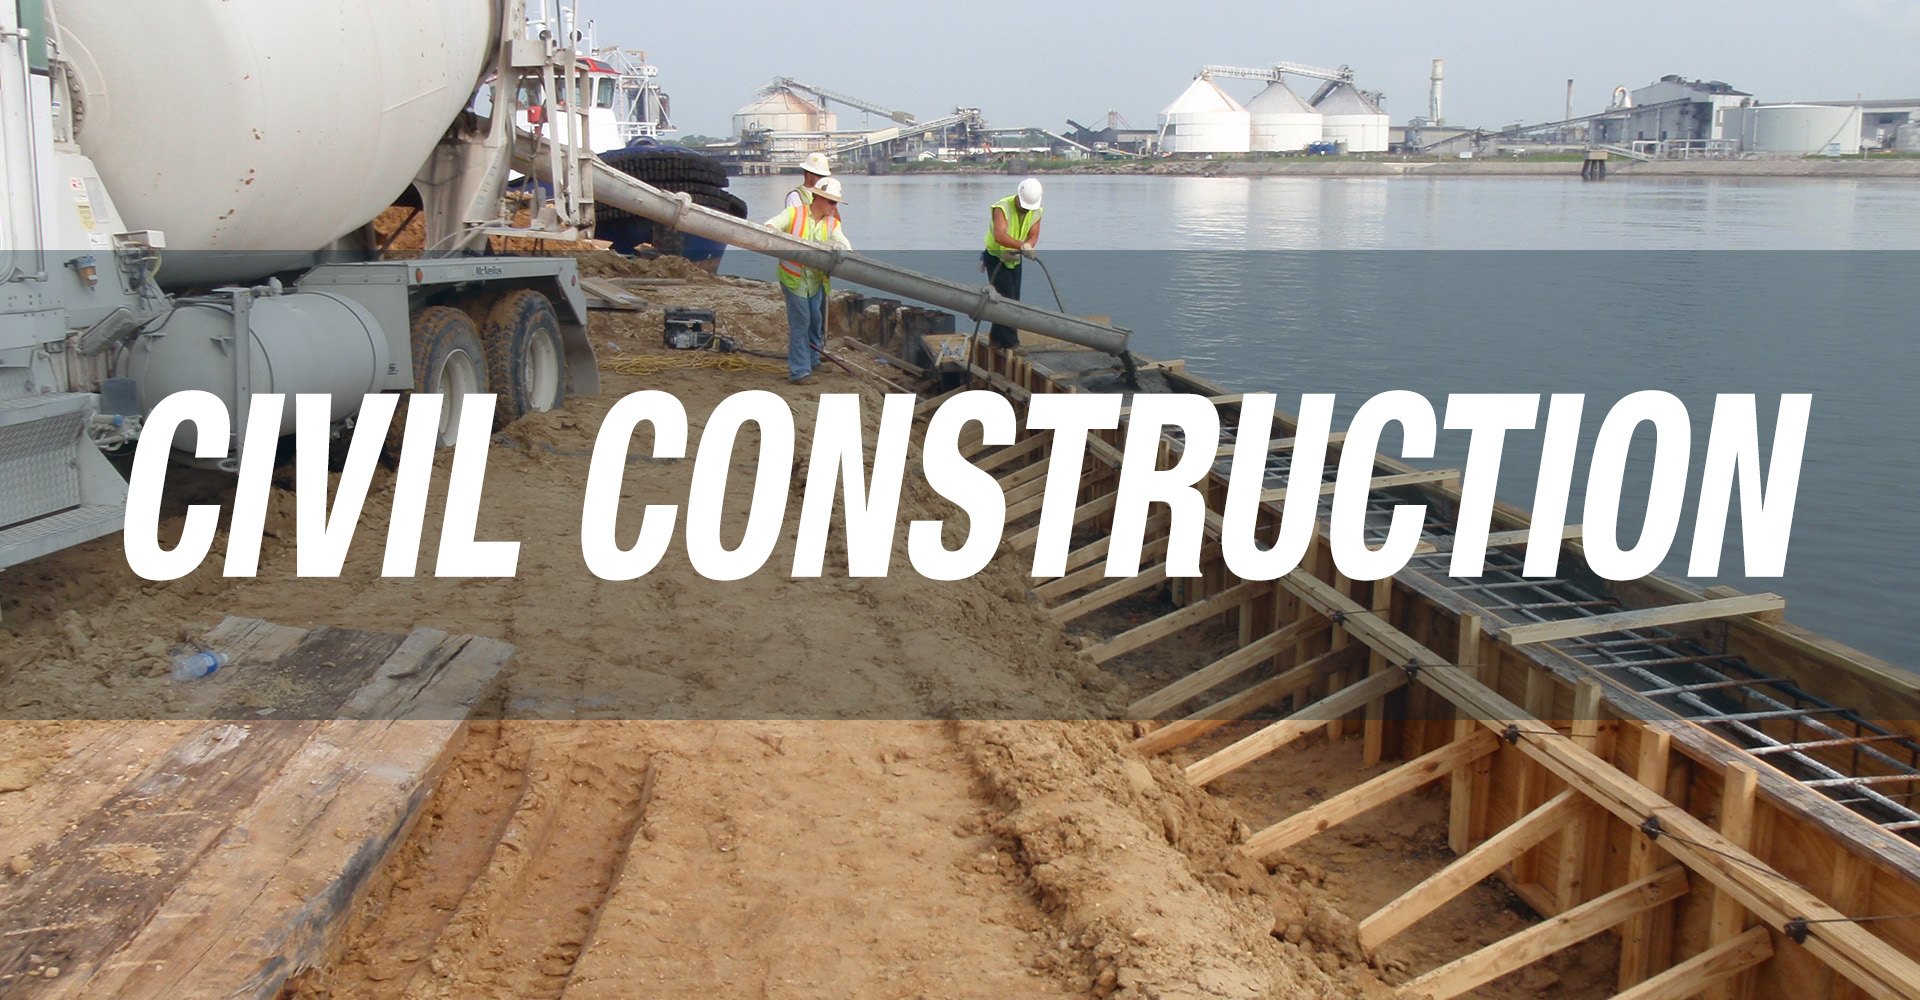 Grillot Construction | Civil, Commercial, Environmental and Marine Construction Services